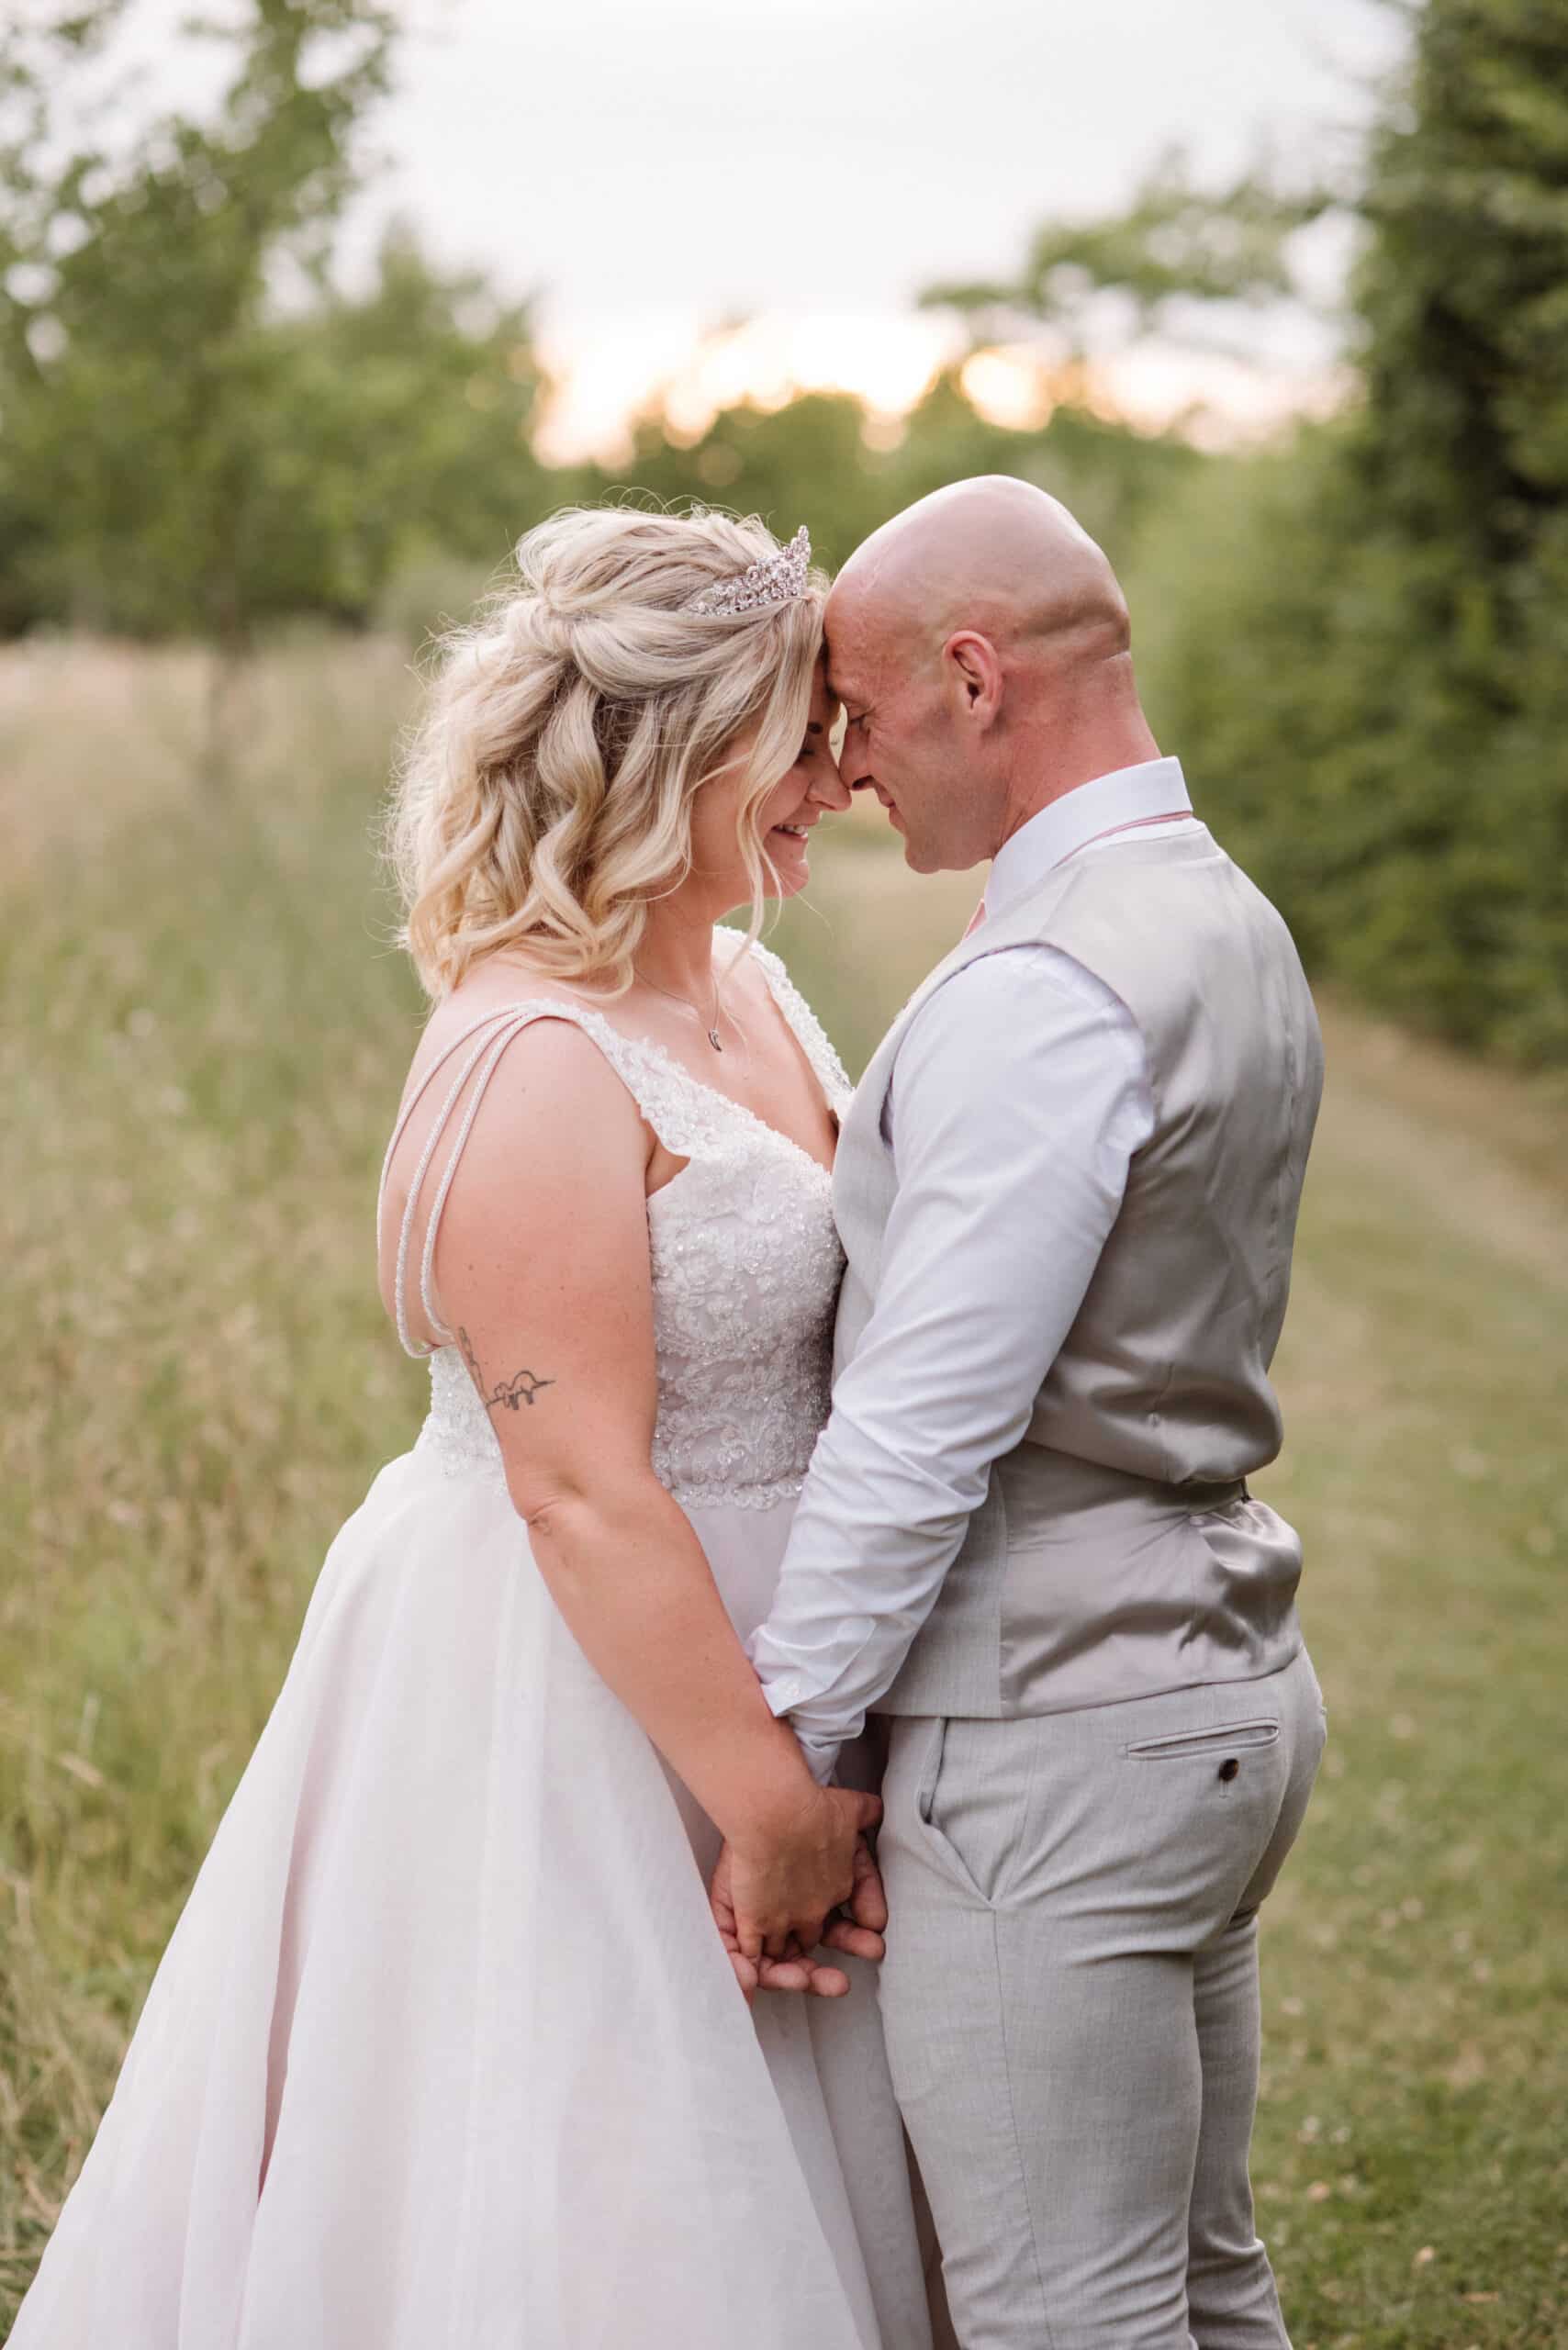 Bride and Groom share a special moment on their wedding day in countryside setting